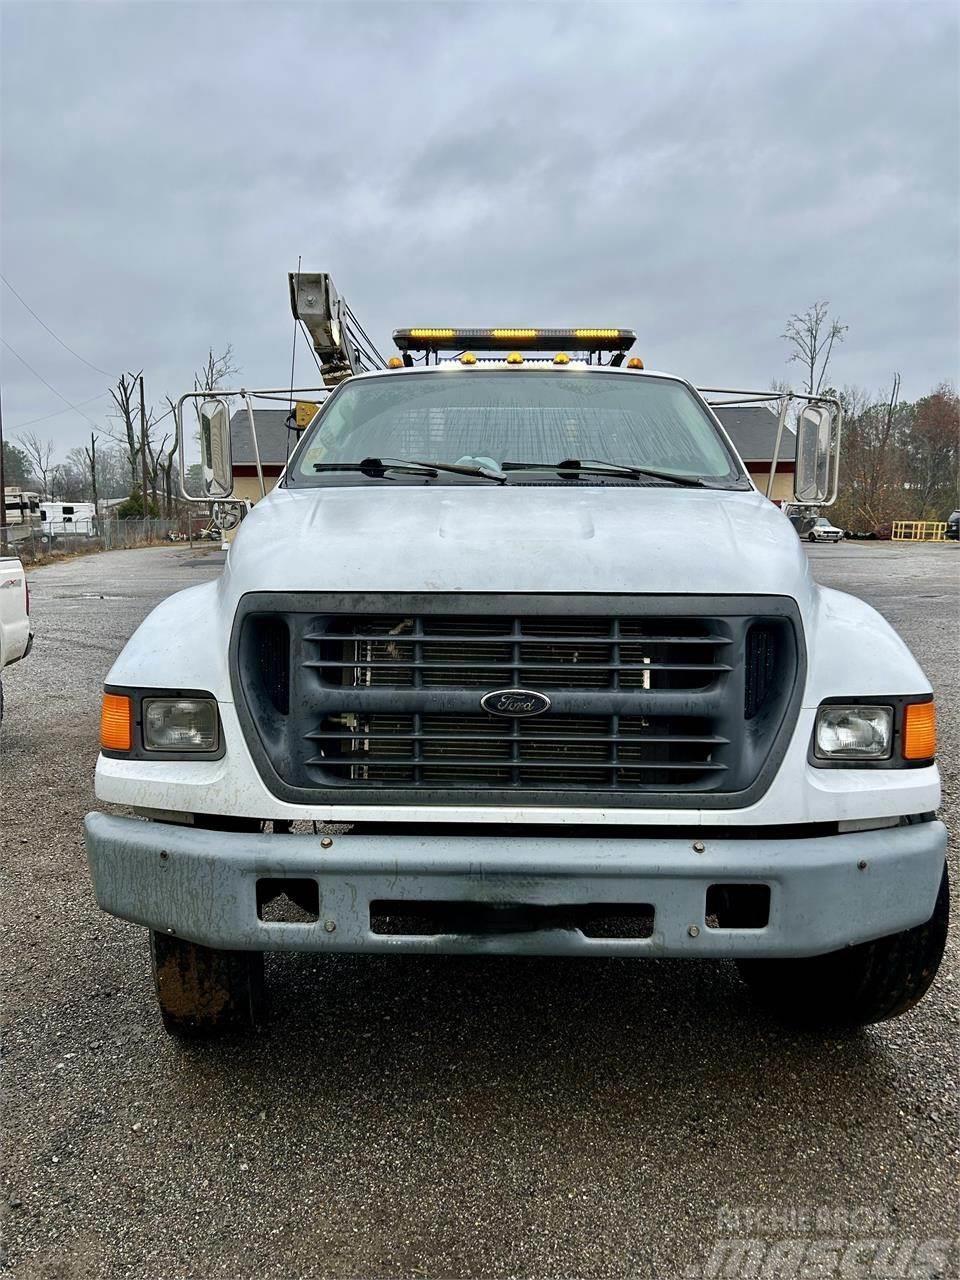 Ford F650 XL Recovery vehicles